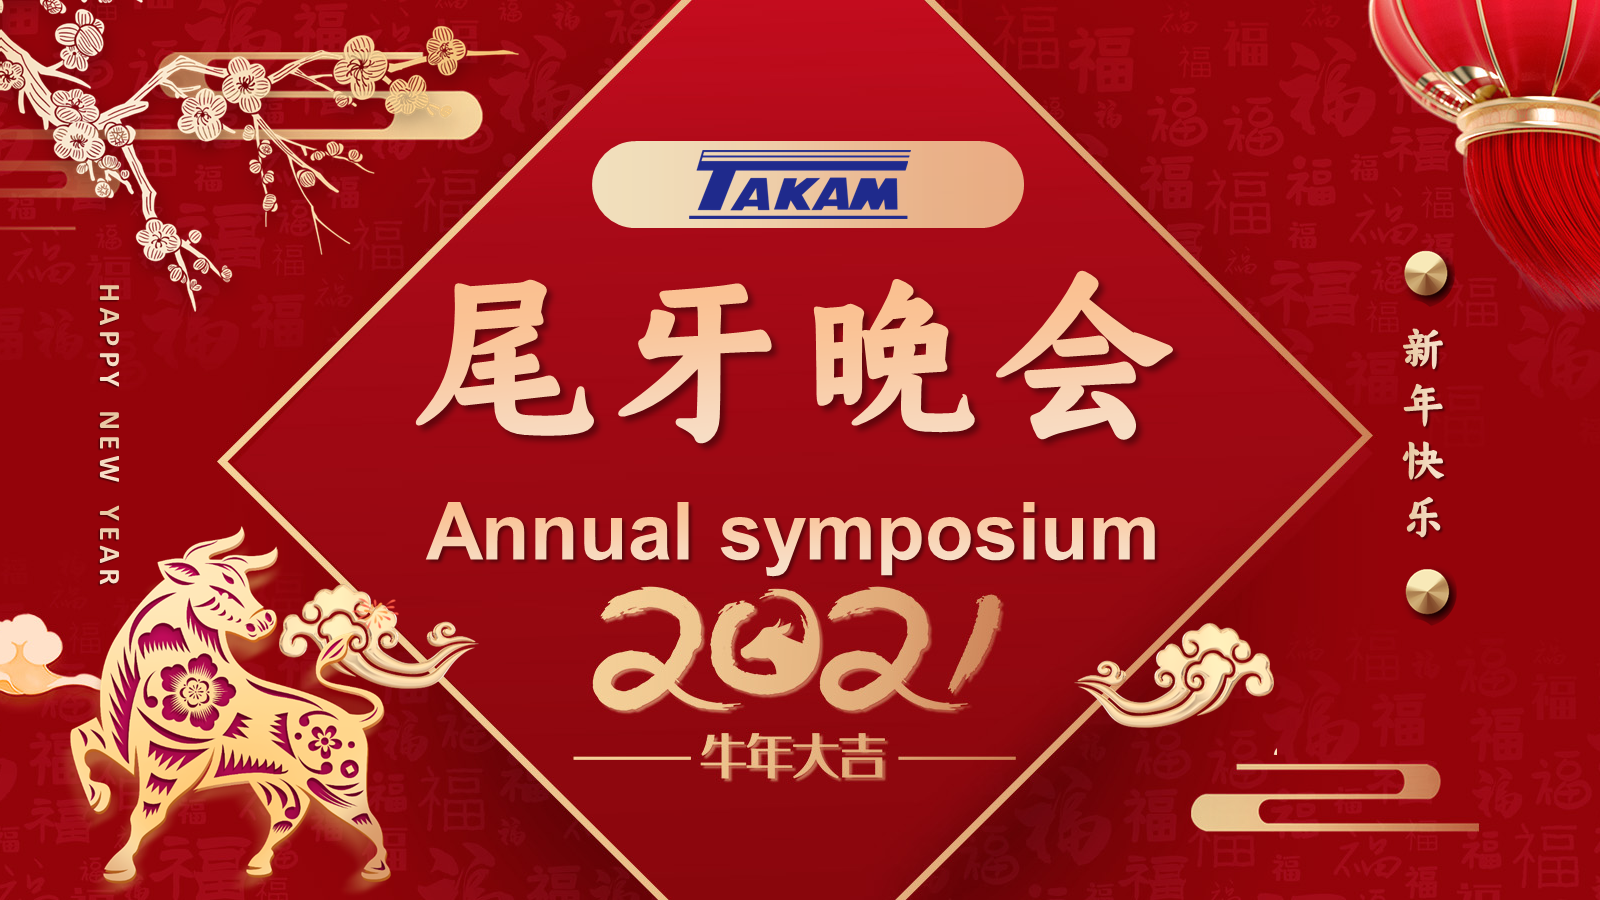 The annual symposium was successfully held!